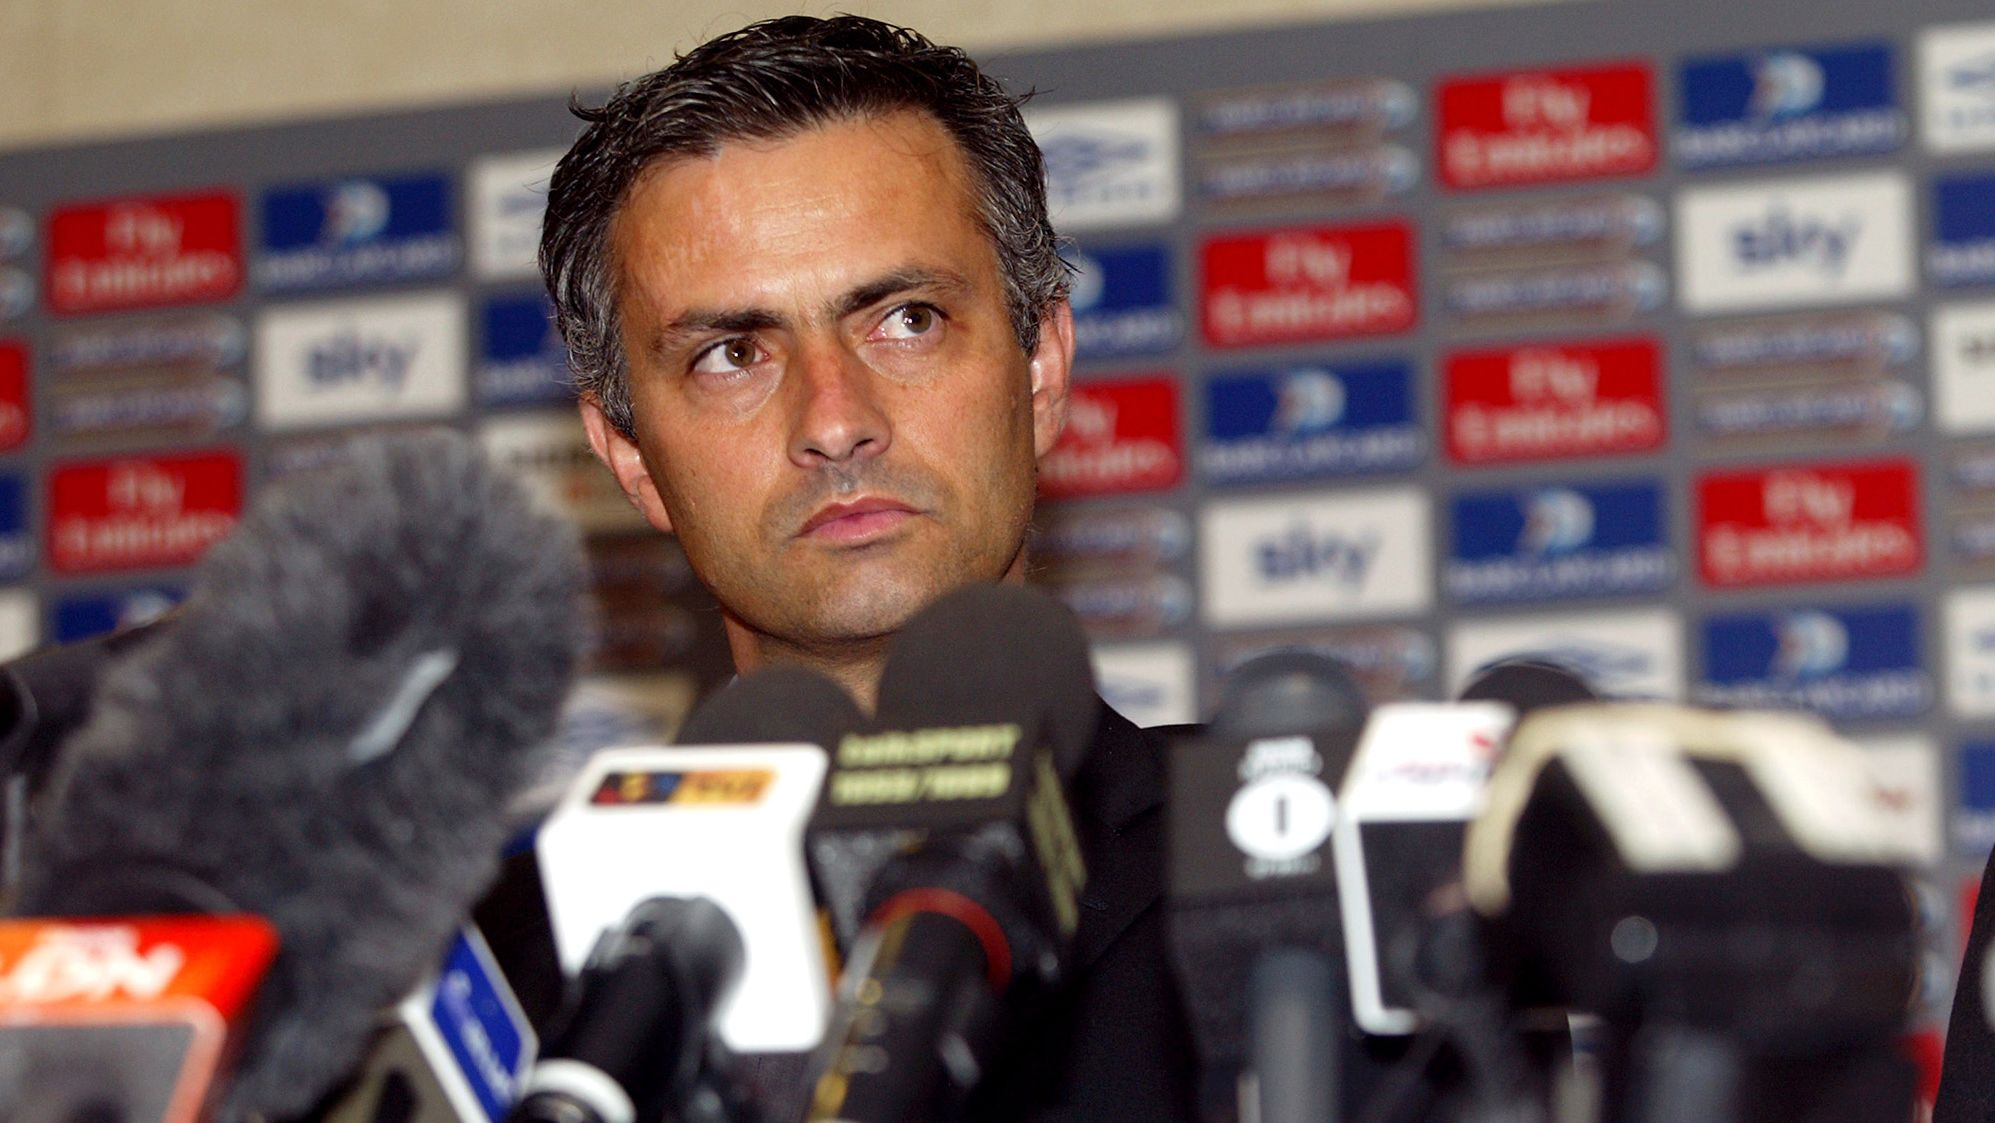 Jose Mourinho has coined plenty of expressions, the first when he reffered to himself as a "Special One".